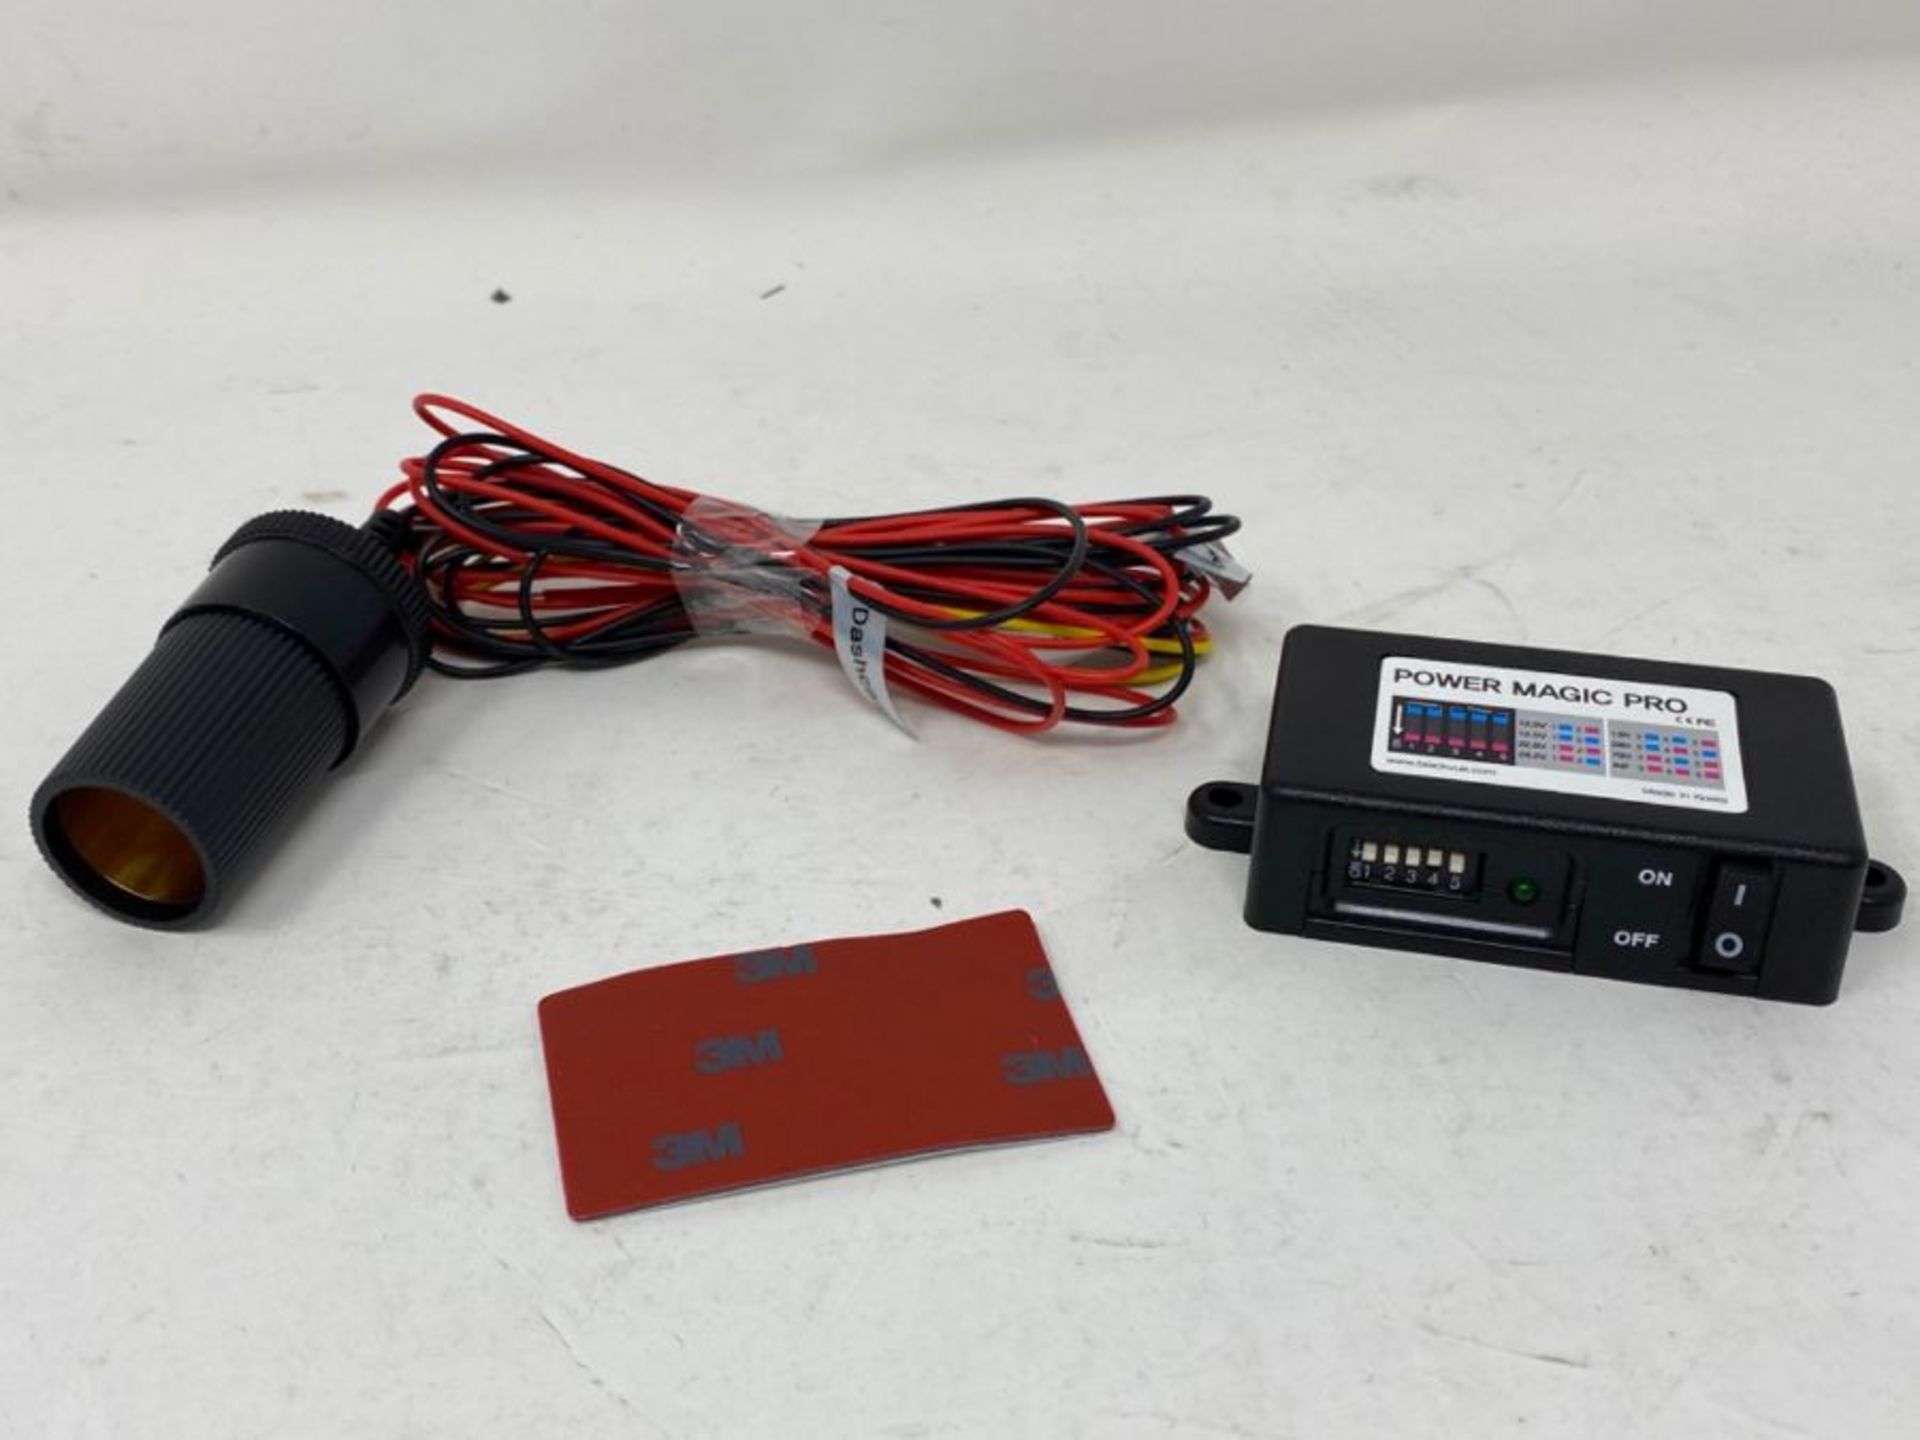 BlackVue Power Magic Pro Hardwire Kit with Parking Mode Switch and Car Battery Protect - Image 3 of 3